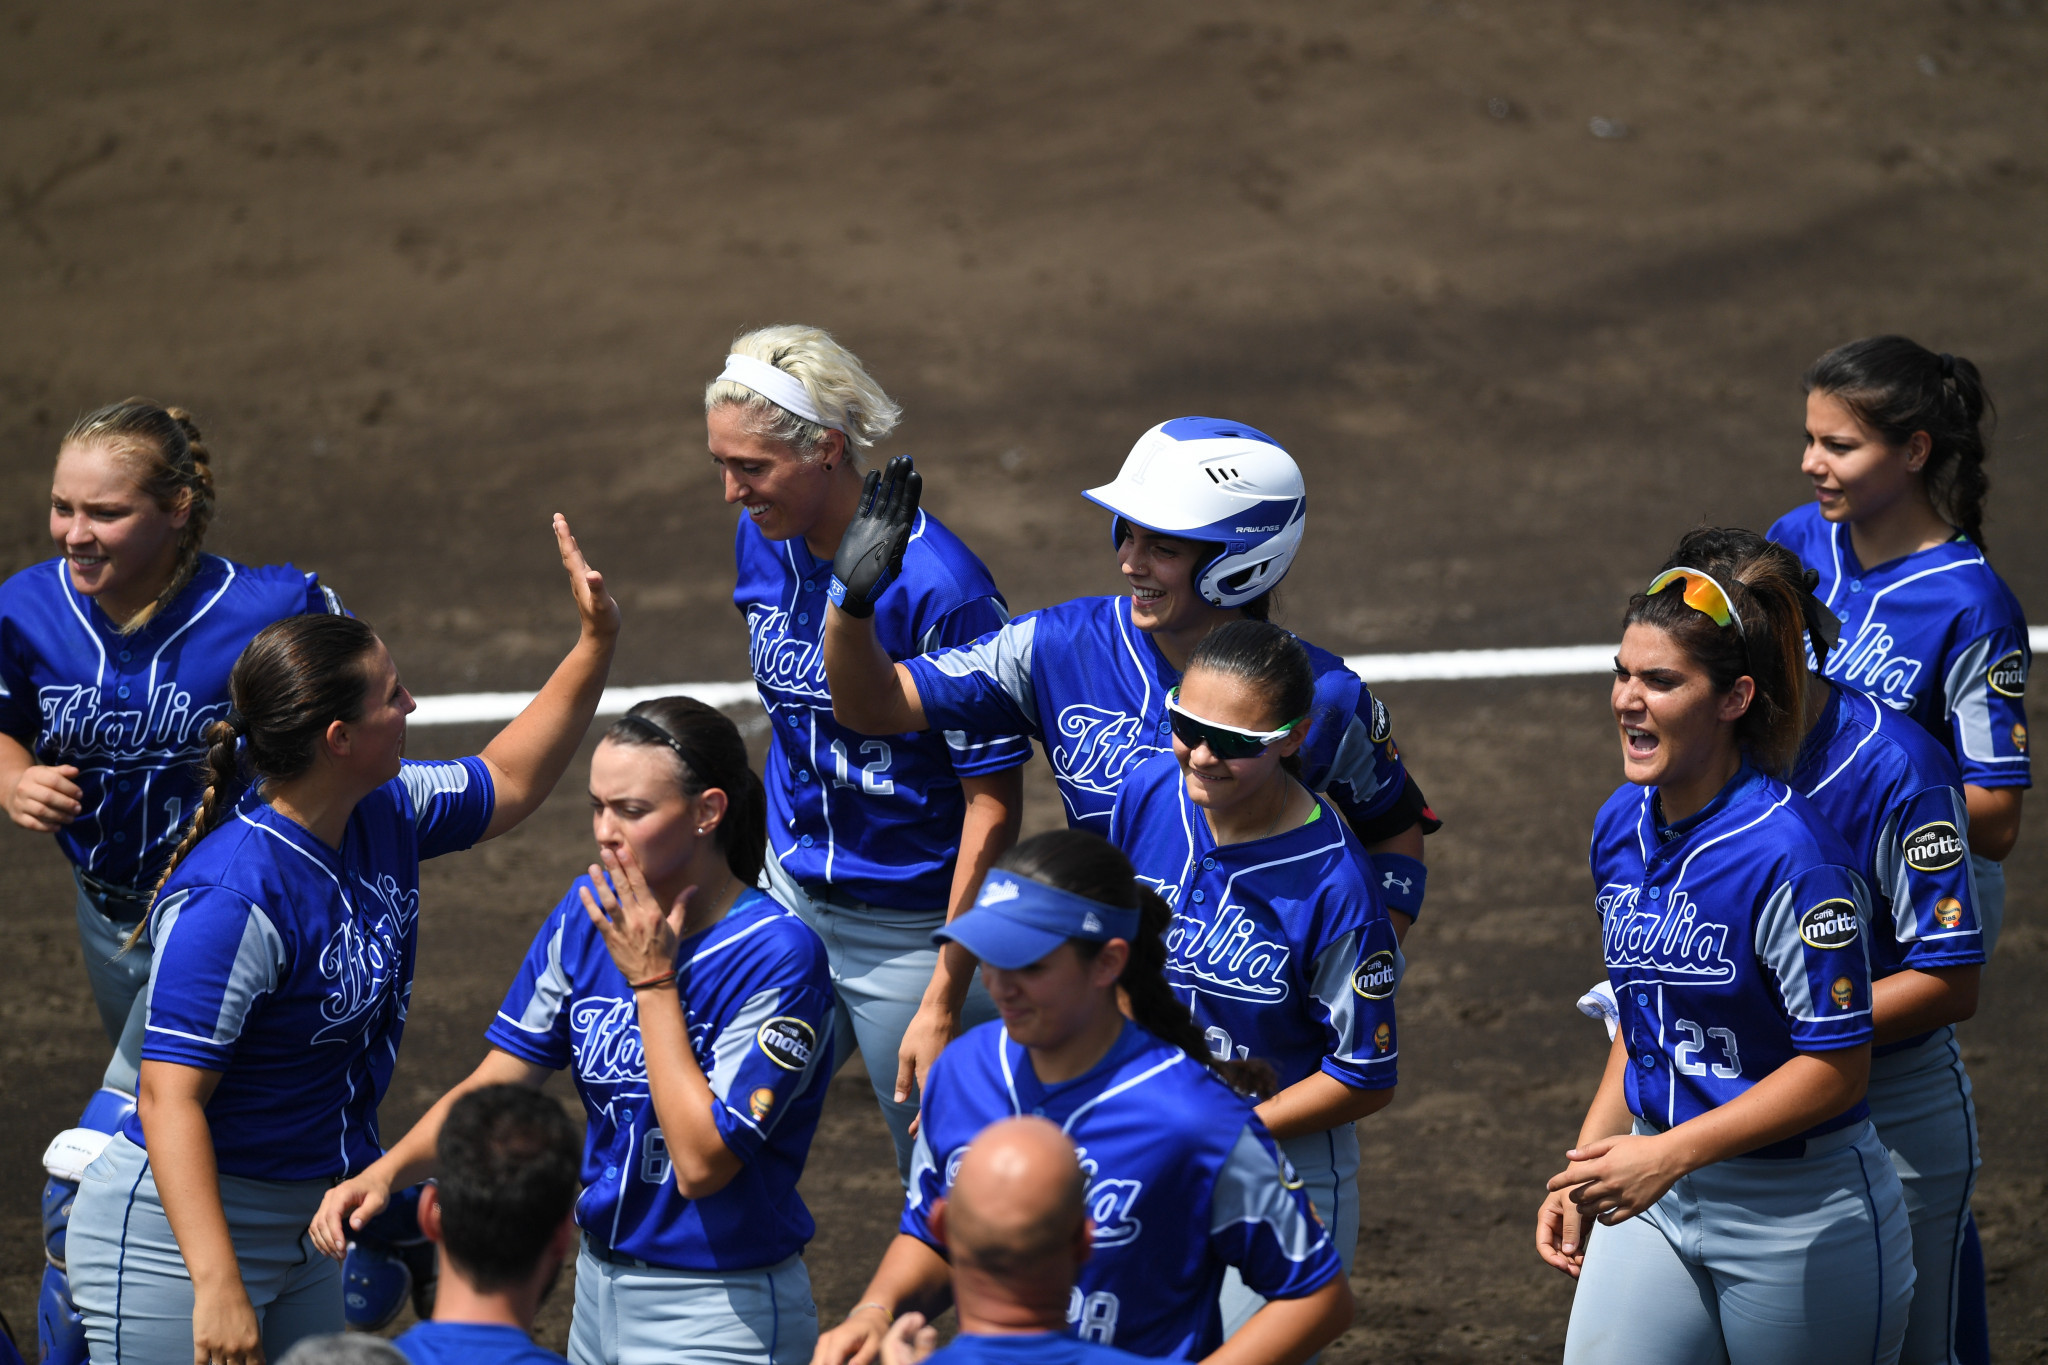 Federico Pizzolini will lead the Italian softball team at Tokyo 2020 ©Getty Images